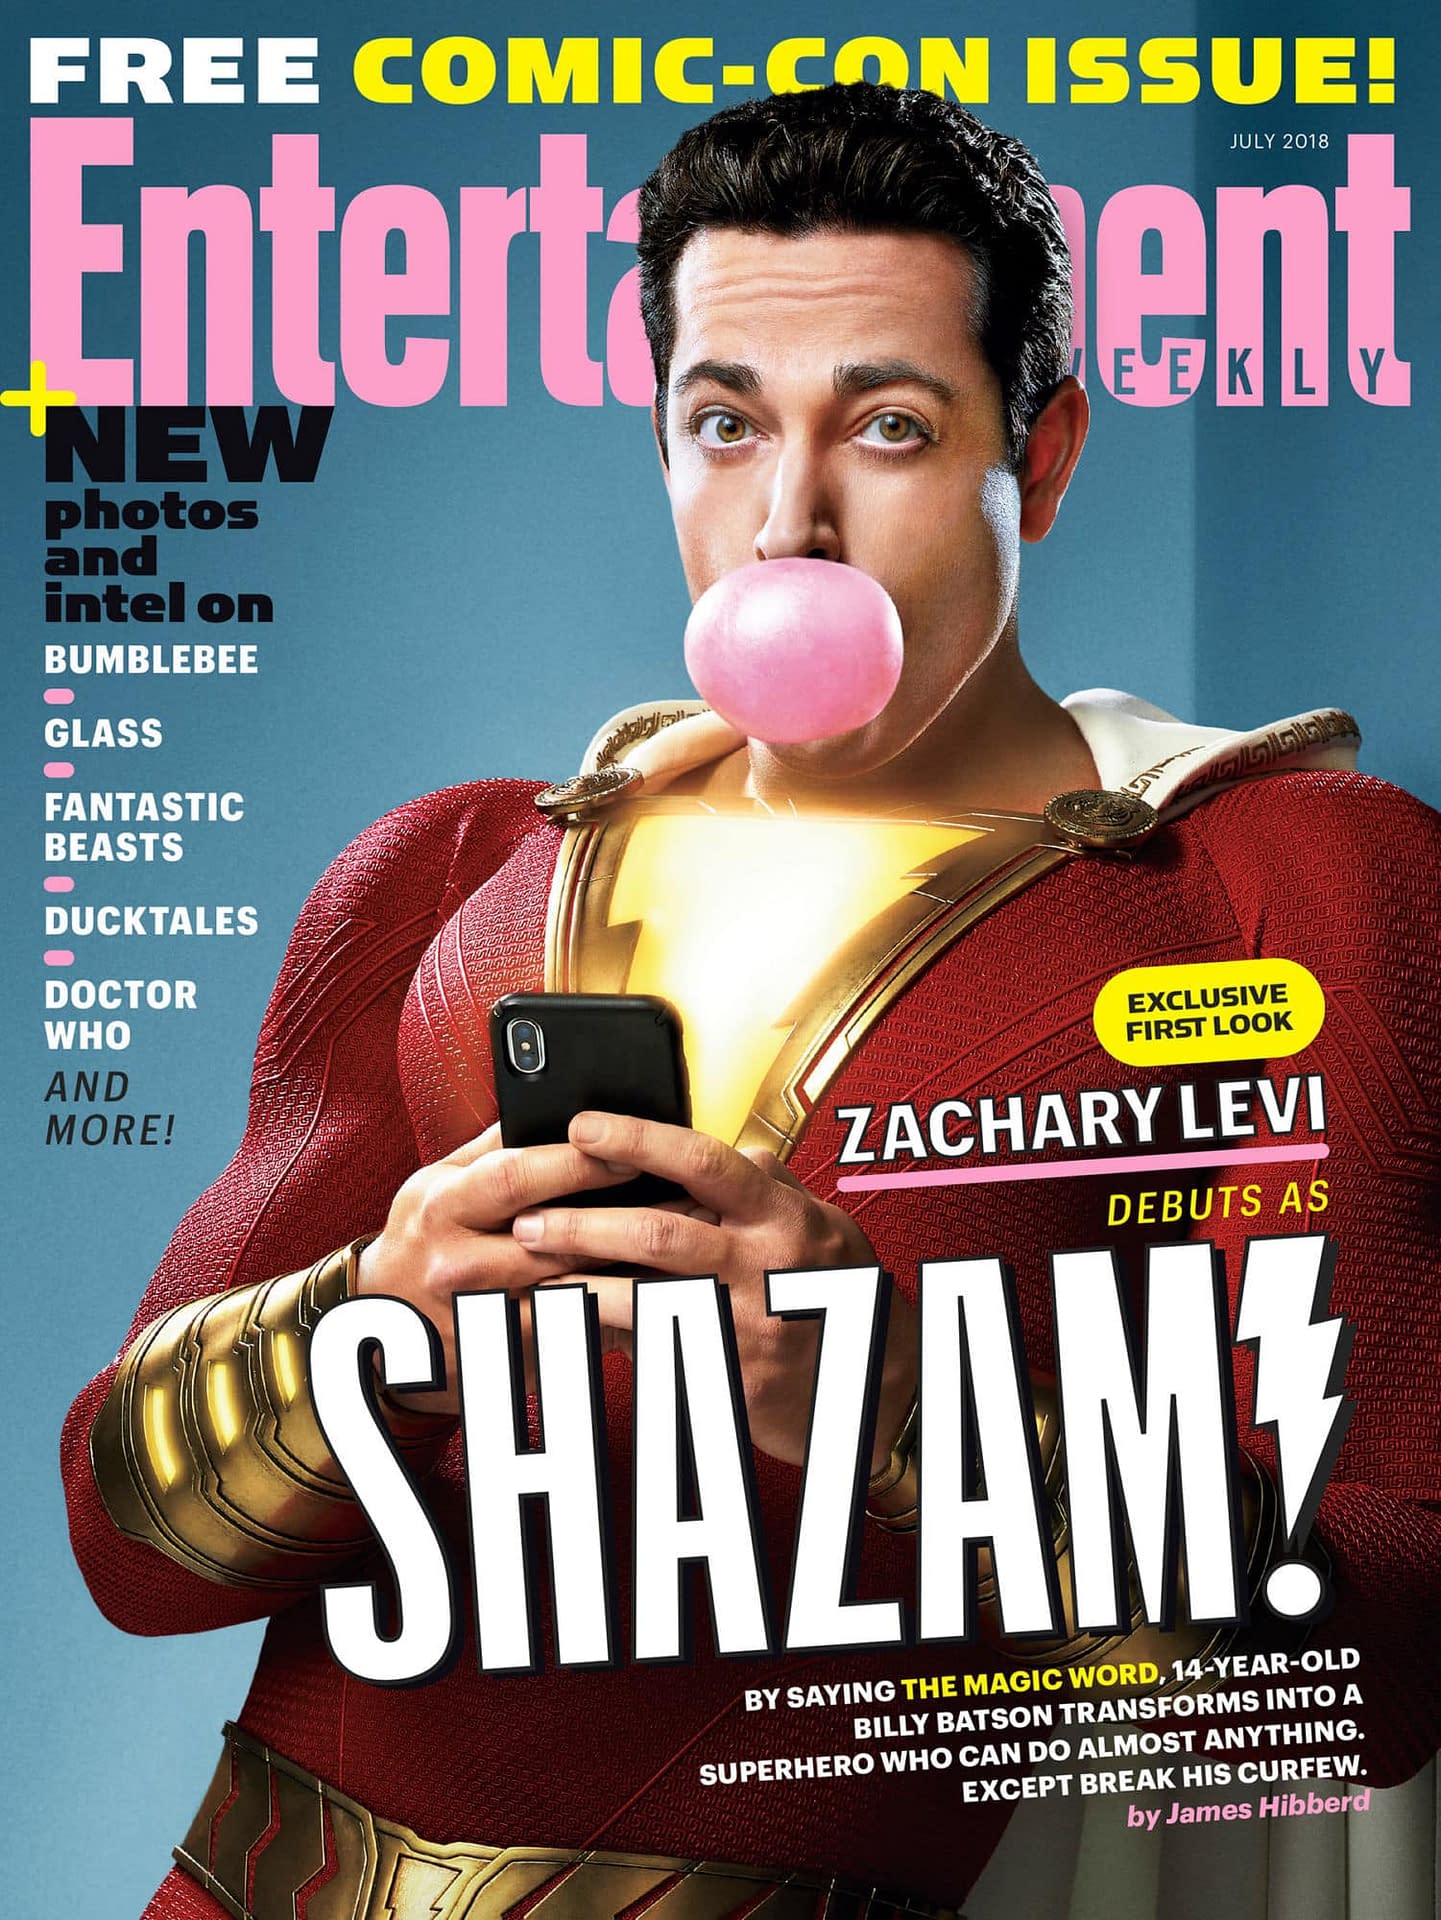 Shazam! is on the Cover of the EW Comic-Con Issue